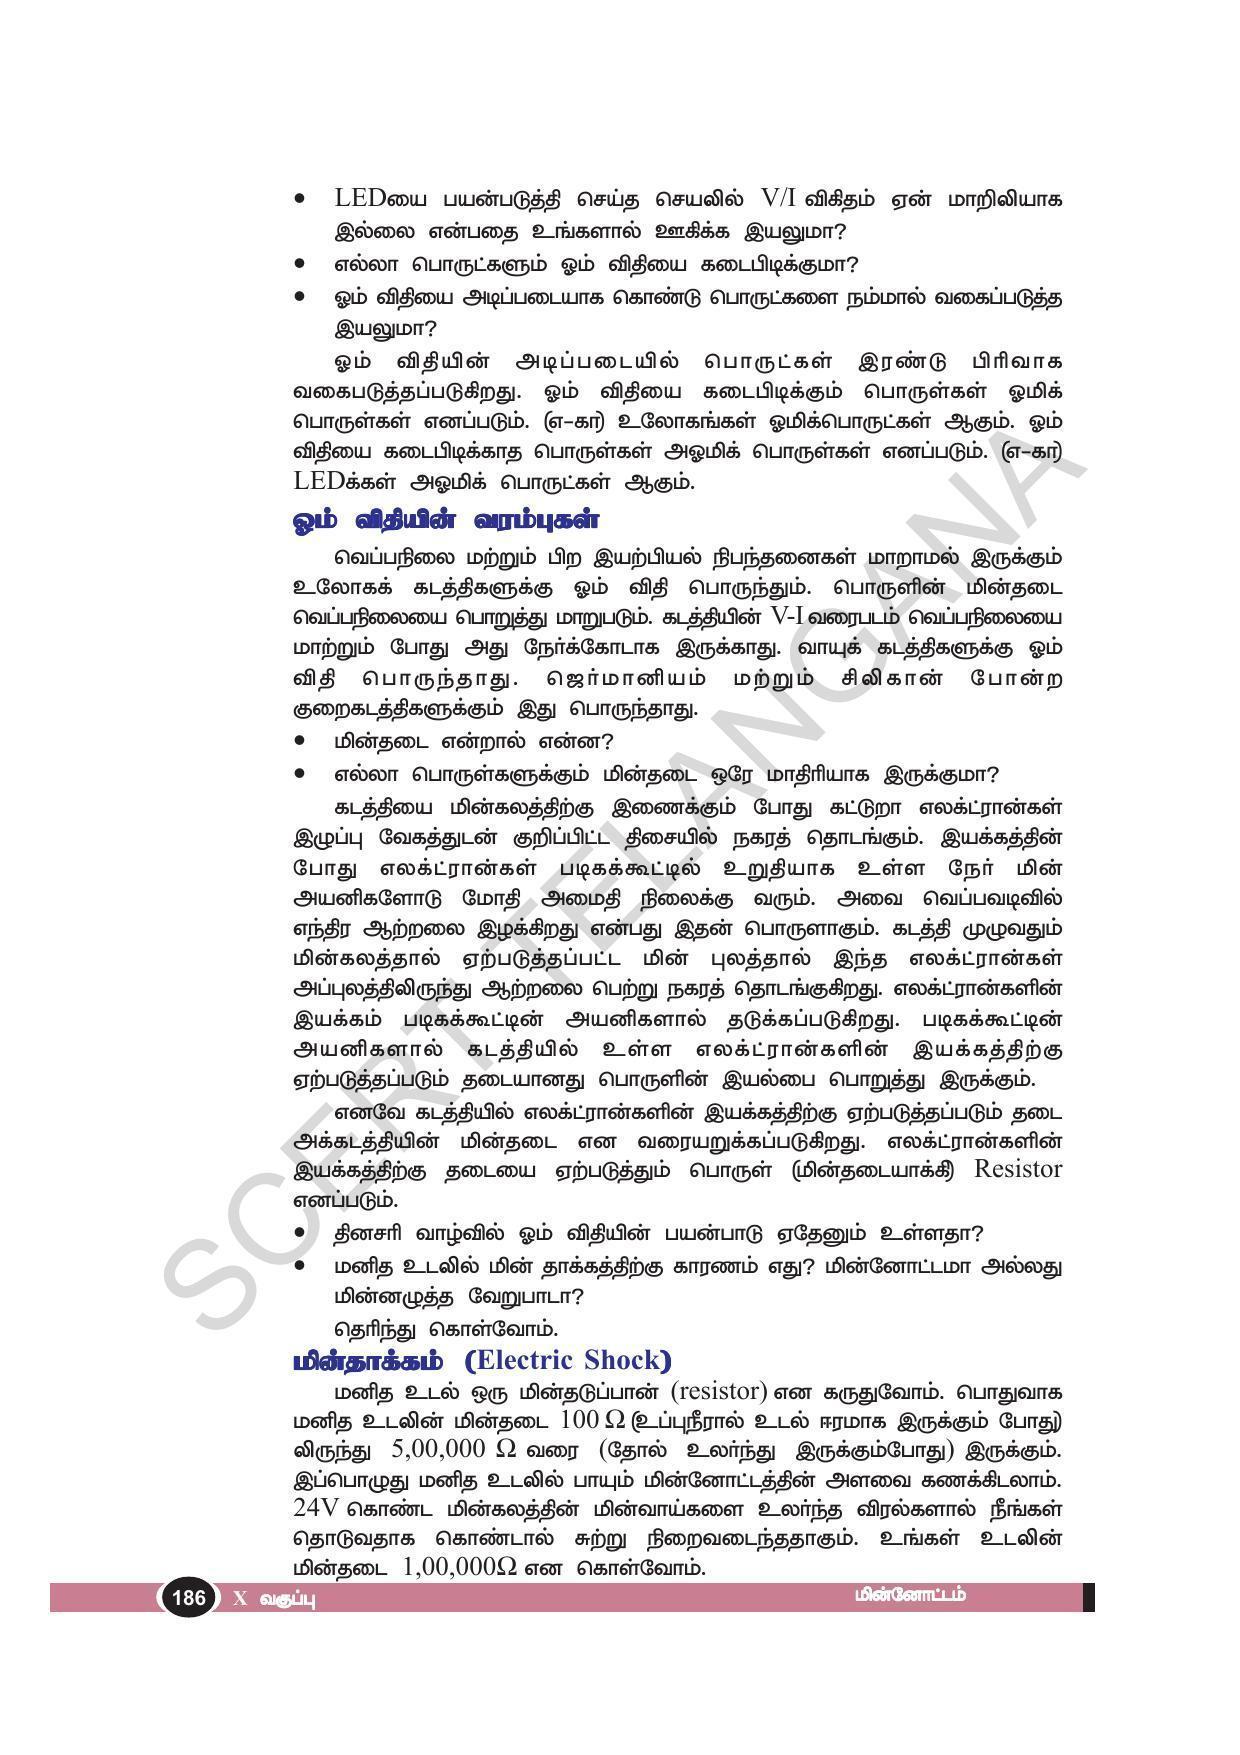 TS SCERT Class 10 Physical Science(Tamil Medium) Text Book - Page 198